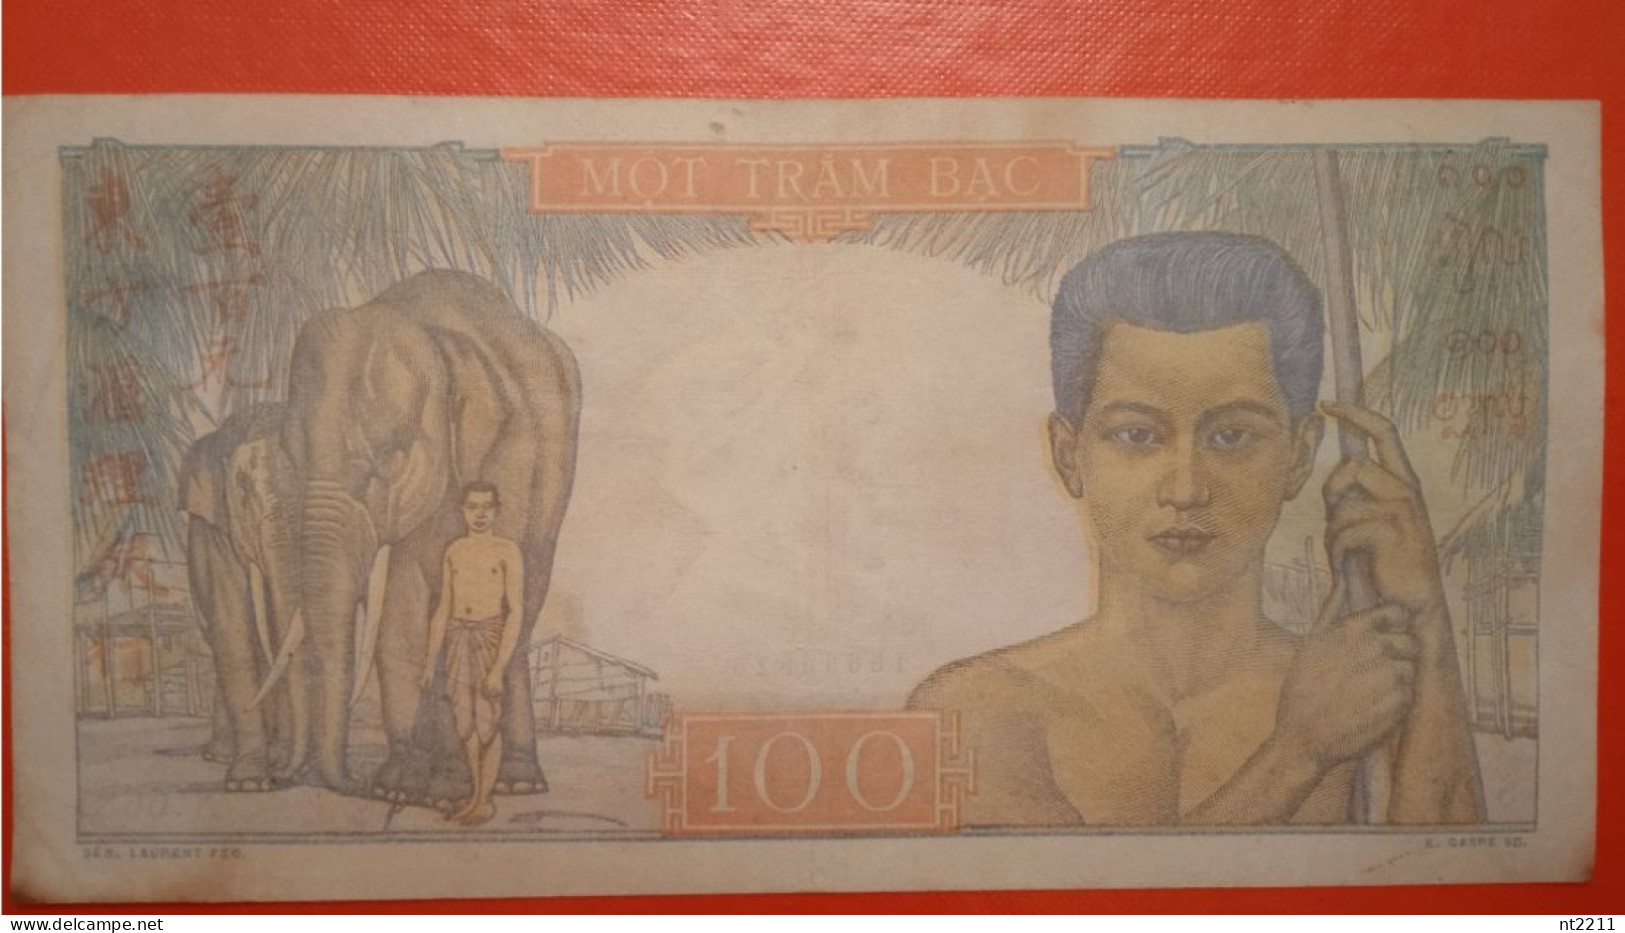 Banknote 100 Piastres French Indochina - Indochine